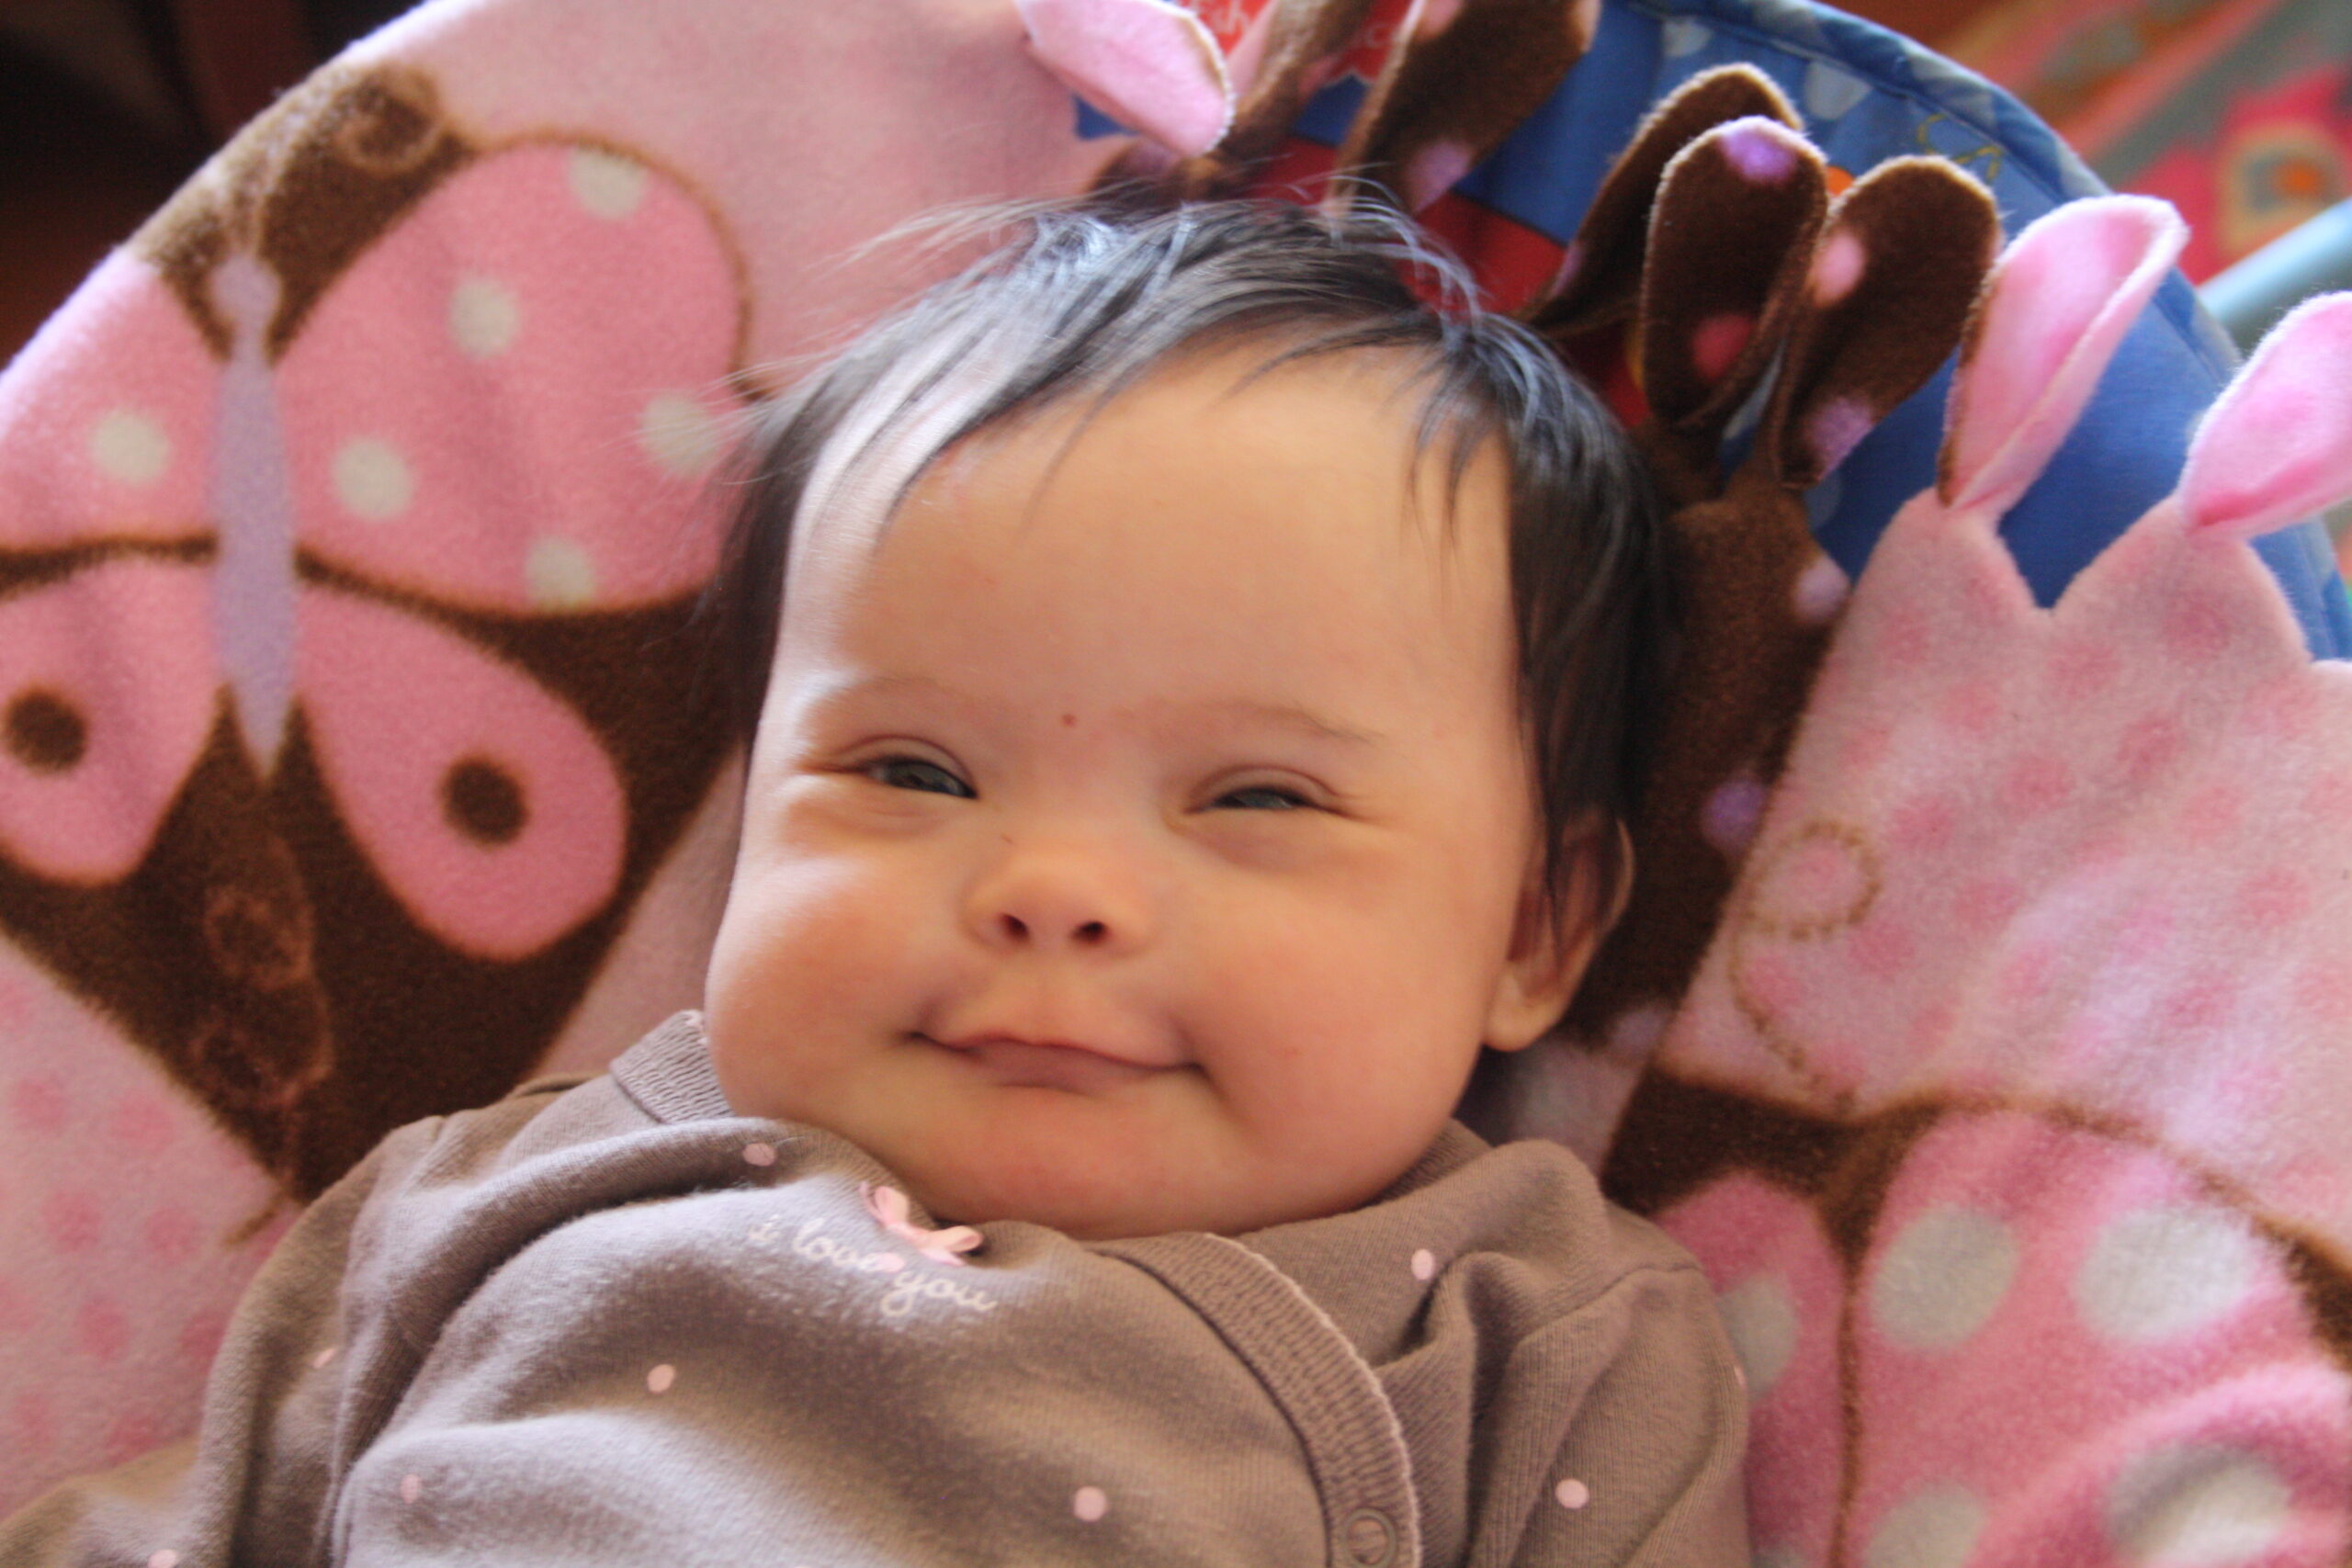 A smiling baby lays on a pink blanket.